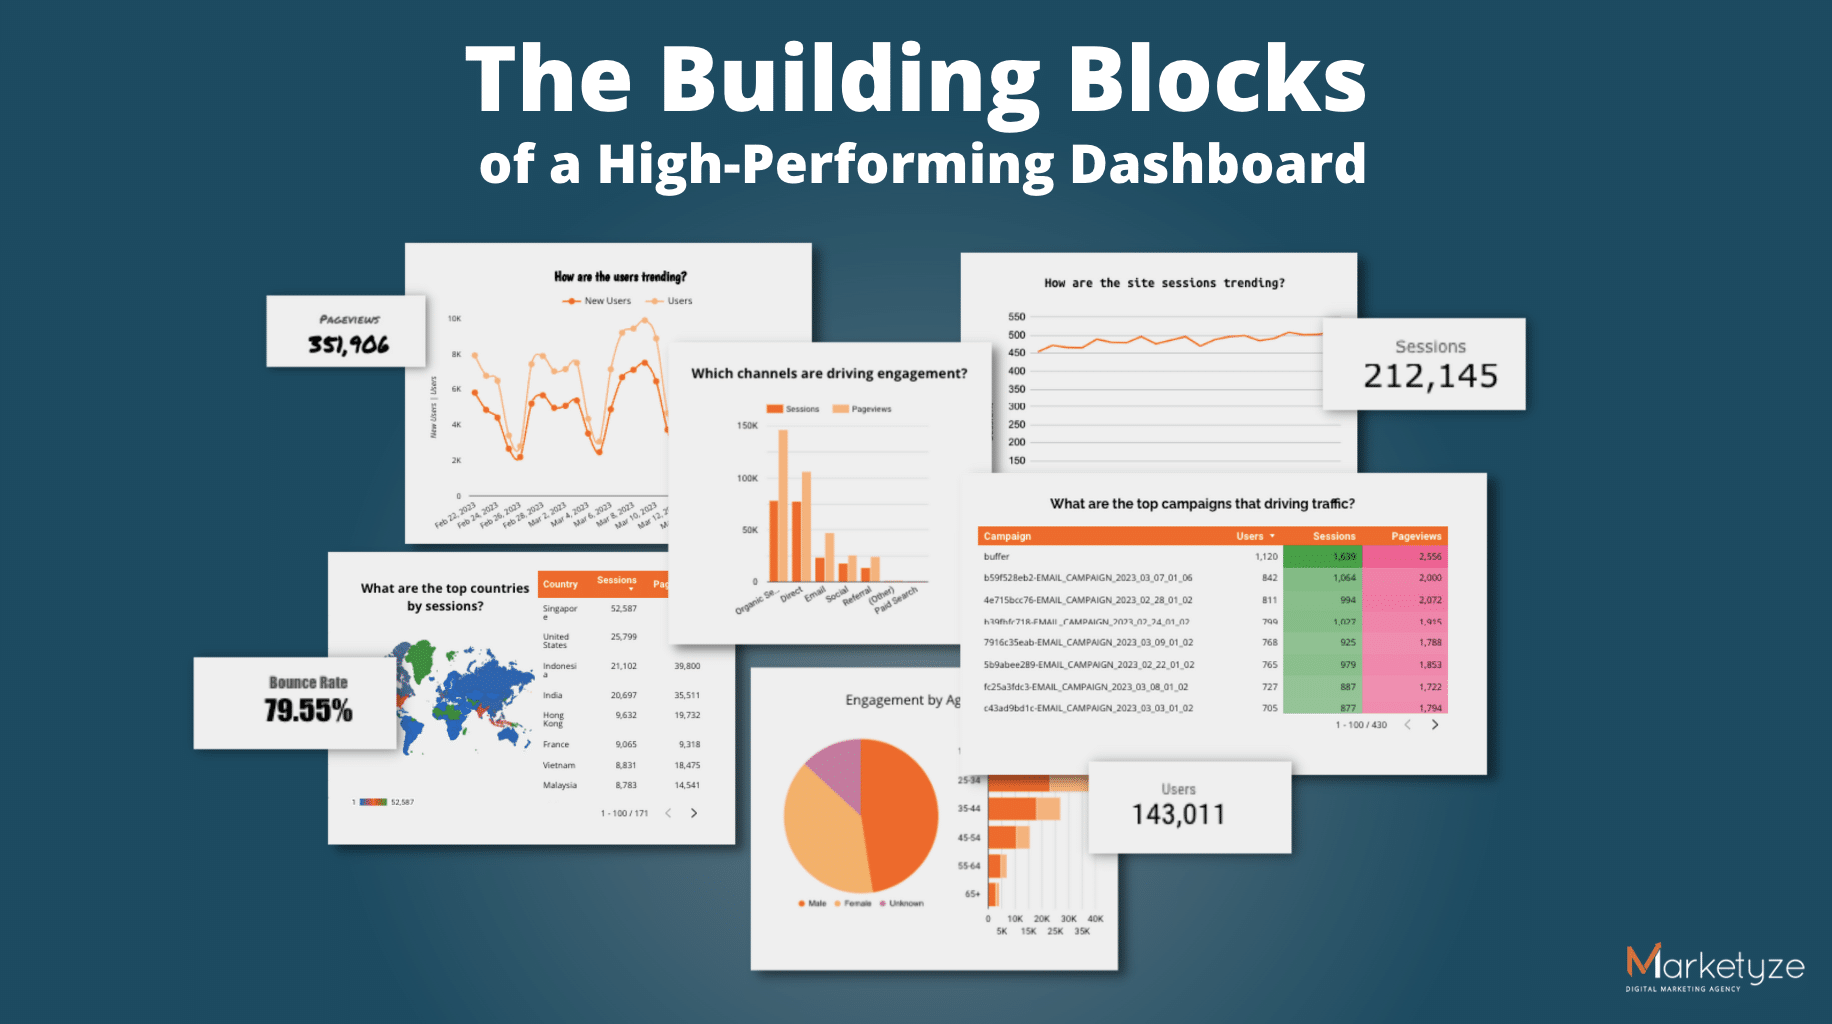 The building blocks of a high-performing dashboard.